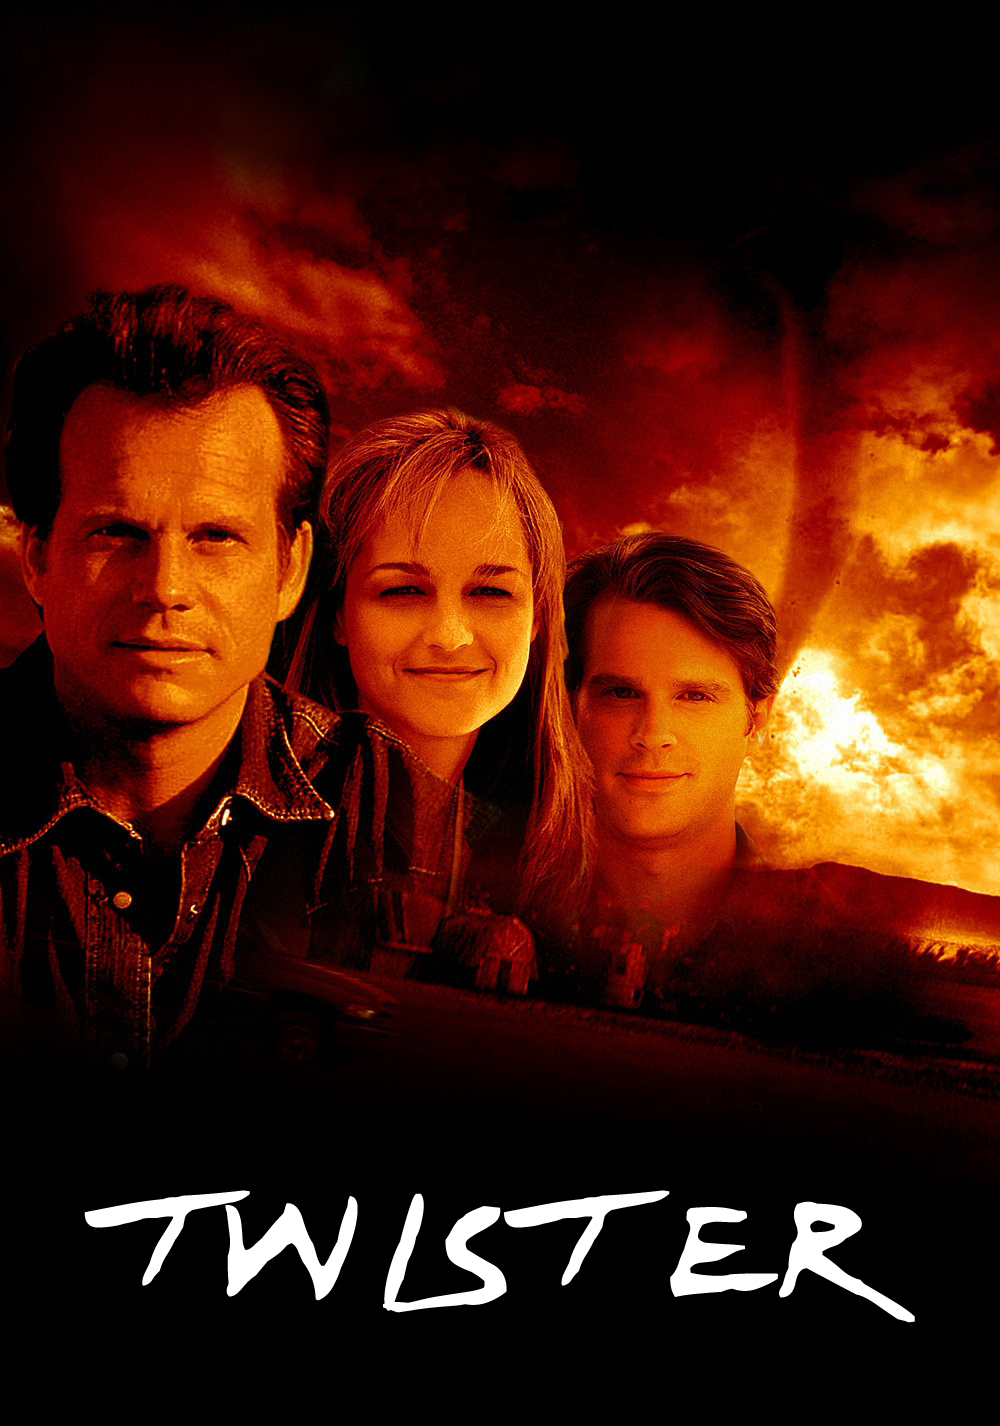 View, Download, Rate, and Comment on this Twister Movie Poster. 